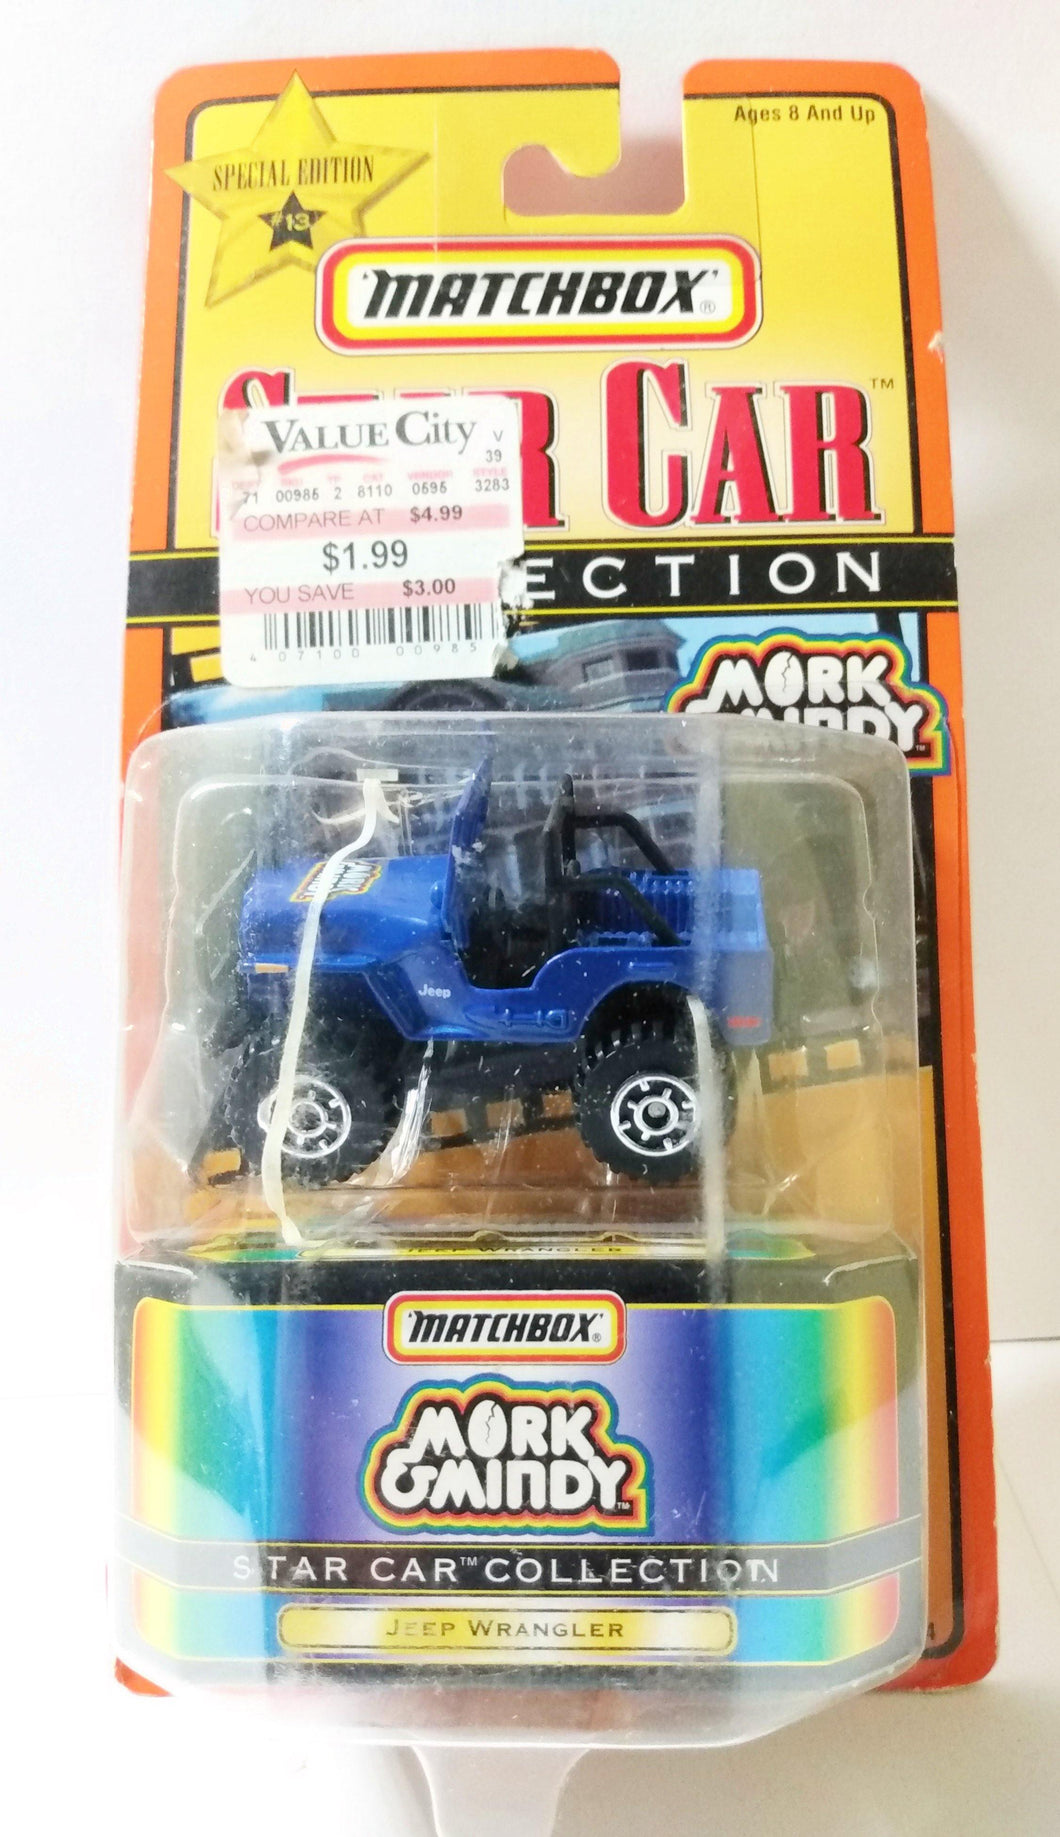 Matchbox Star Car Collection Mork and Mindy Jeep Wrangler 1998 - TulipStuff